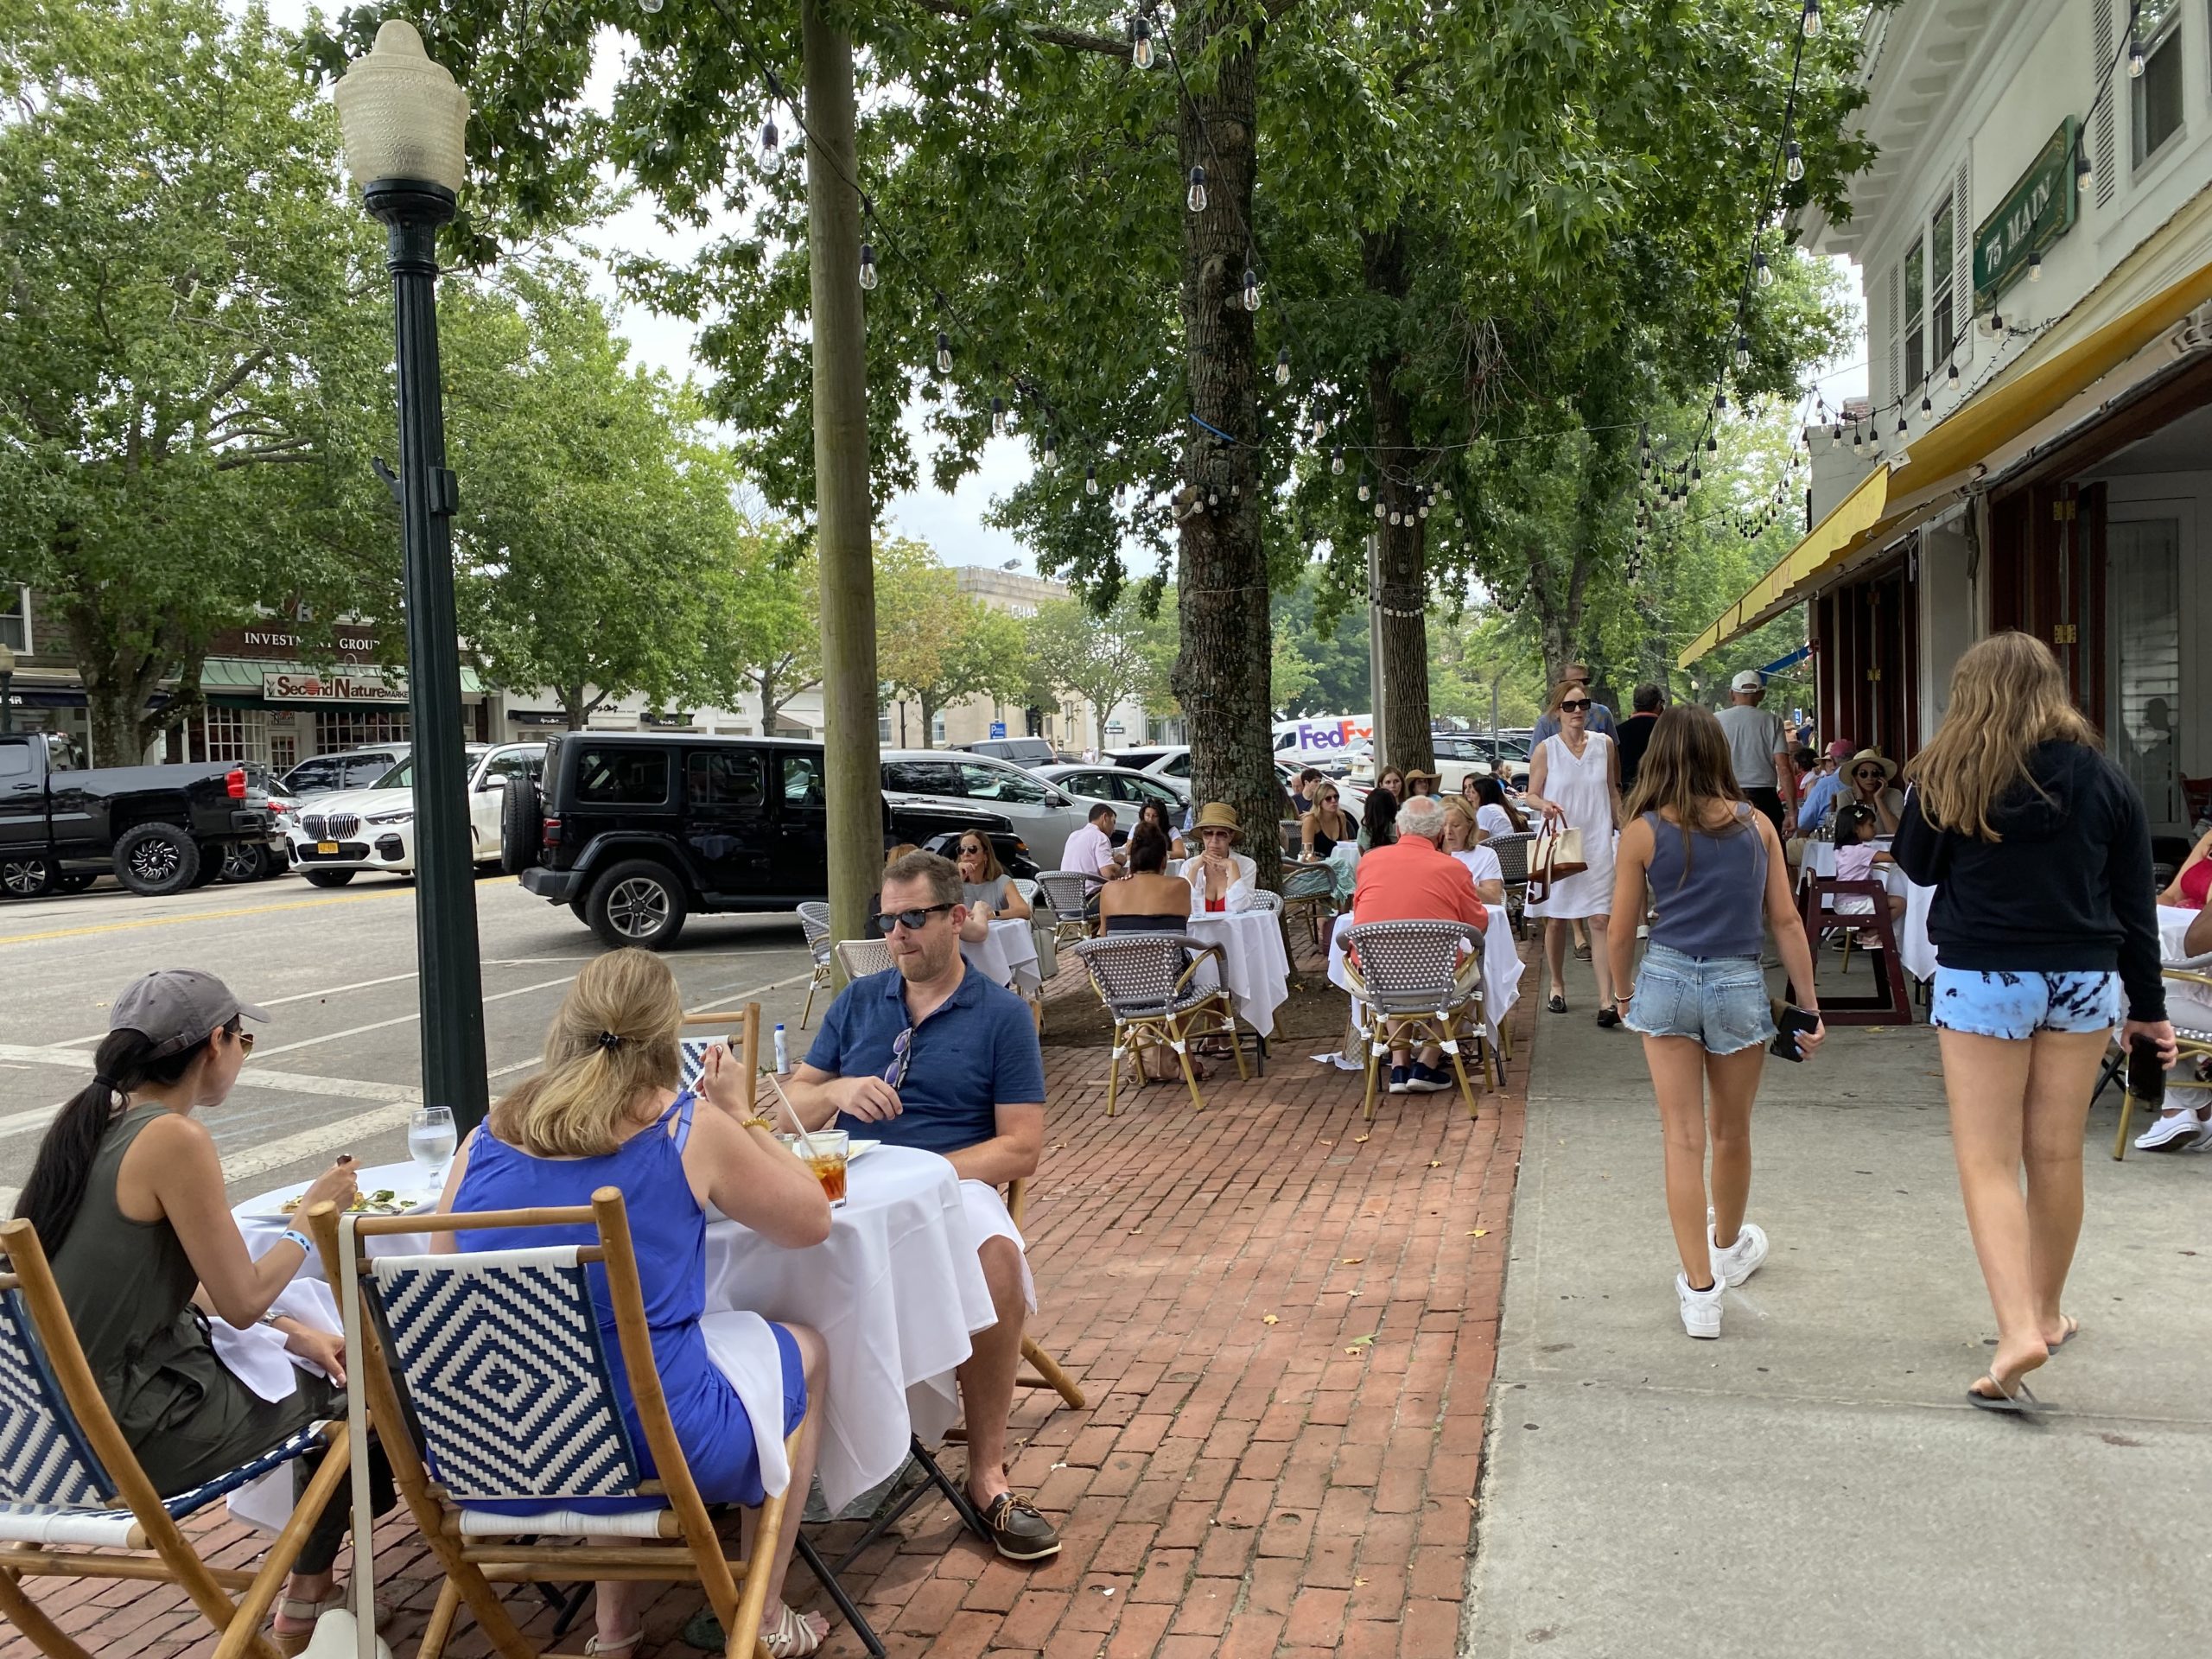 East Hampton and Southampton are making changes to rules to help restaurants continue using more outdoor spaces for dining like they were allowed to do under the pandemic's emergency rules.